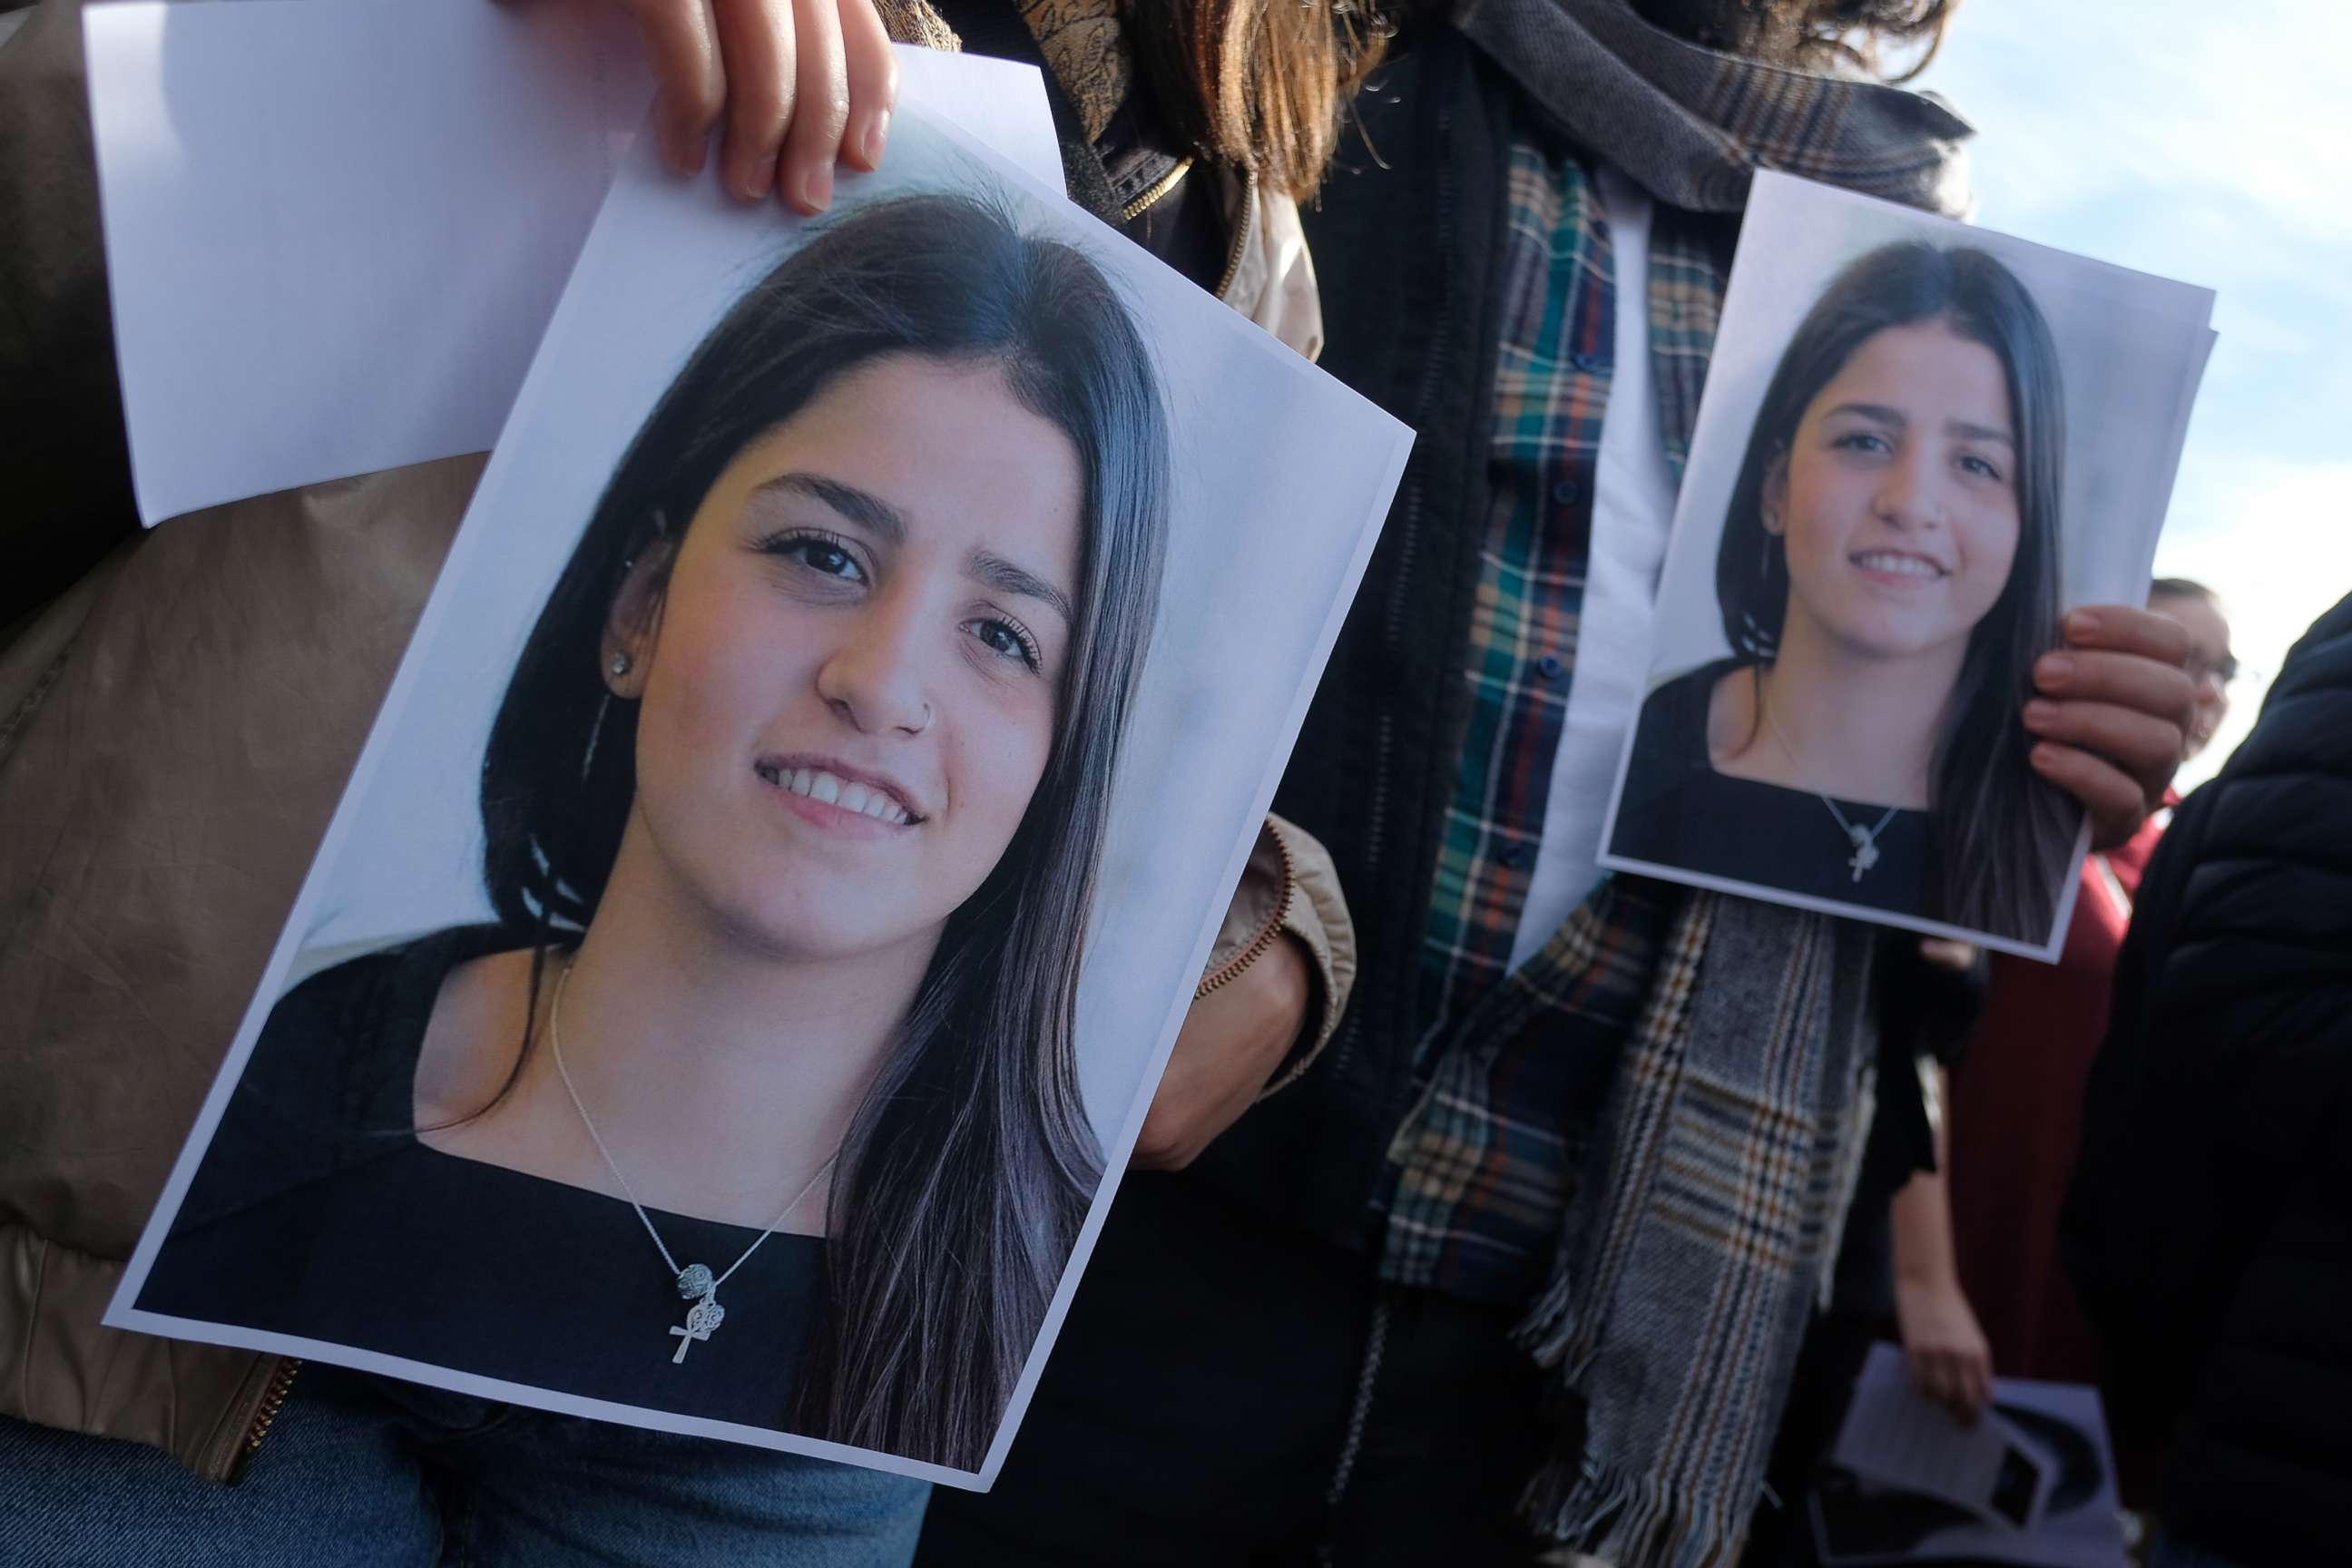 PHOTO: Students from Bard College hold up a photograph of their classmate Sara Mardini, a Syrian refugee who is being held in Greece on charges of people smuggling and spying, during a demonstration to demand her release, Oct. 20, 2018, in Berlin. 